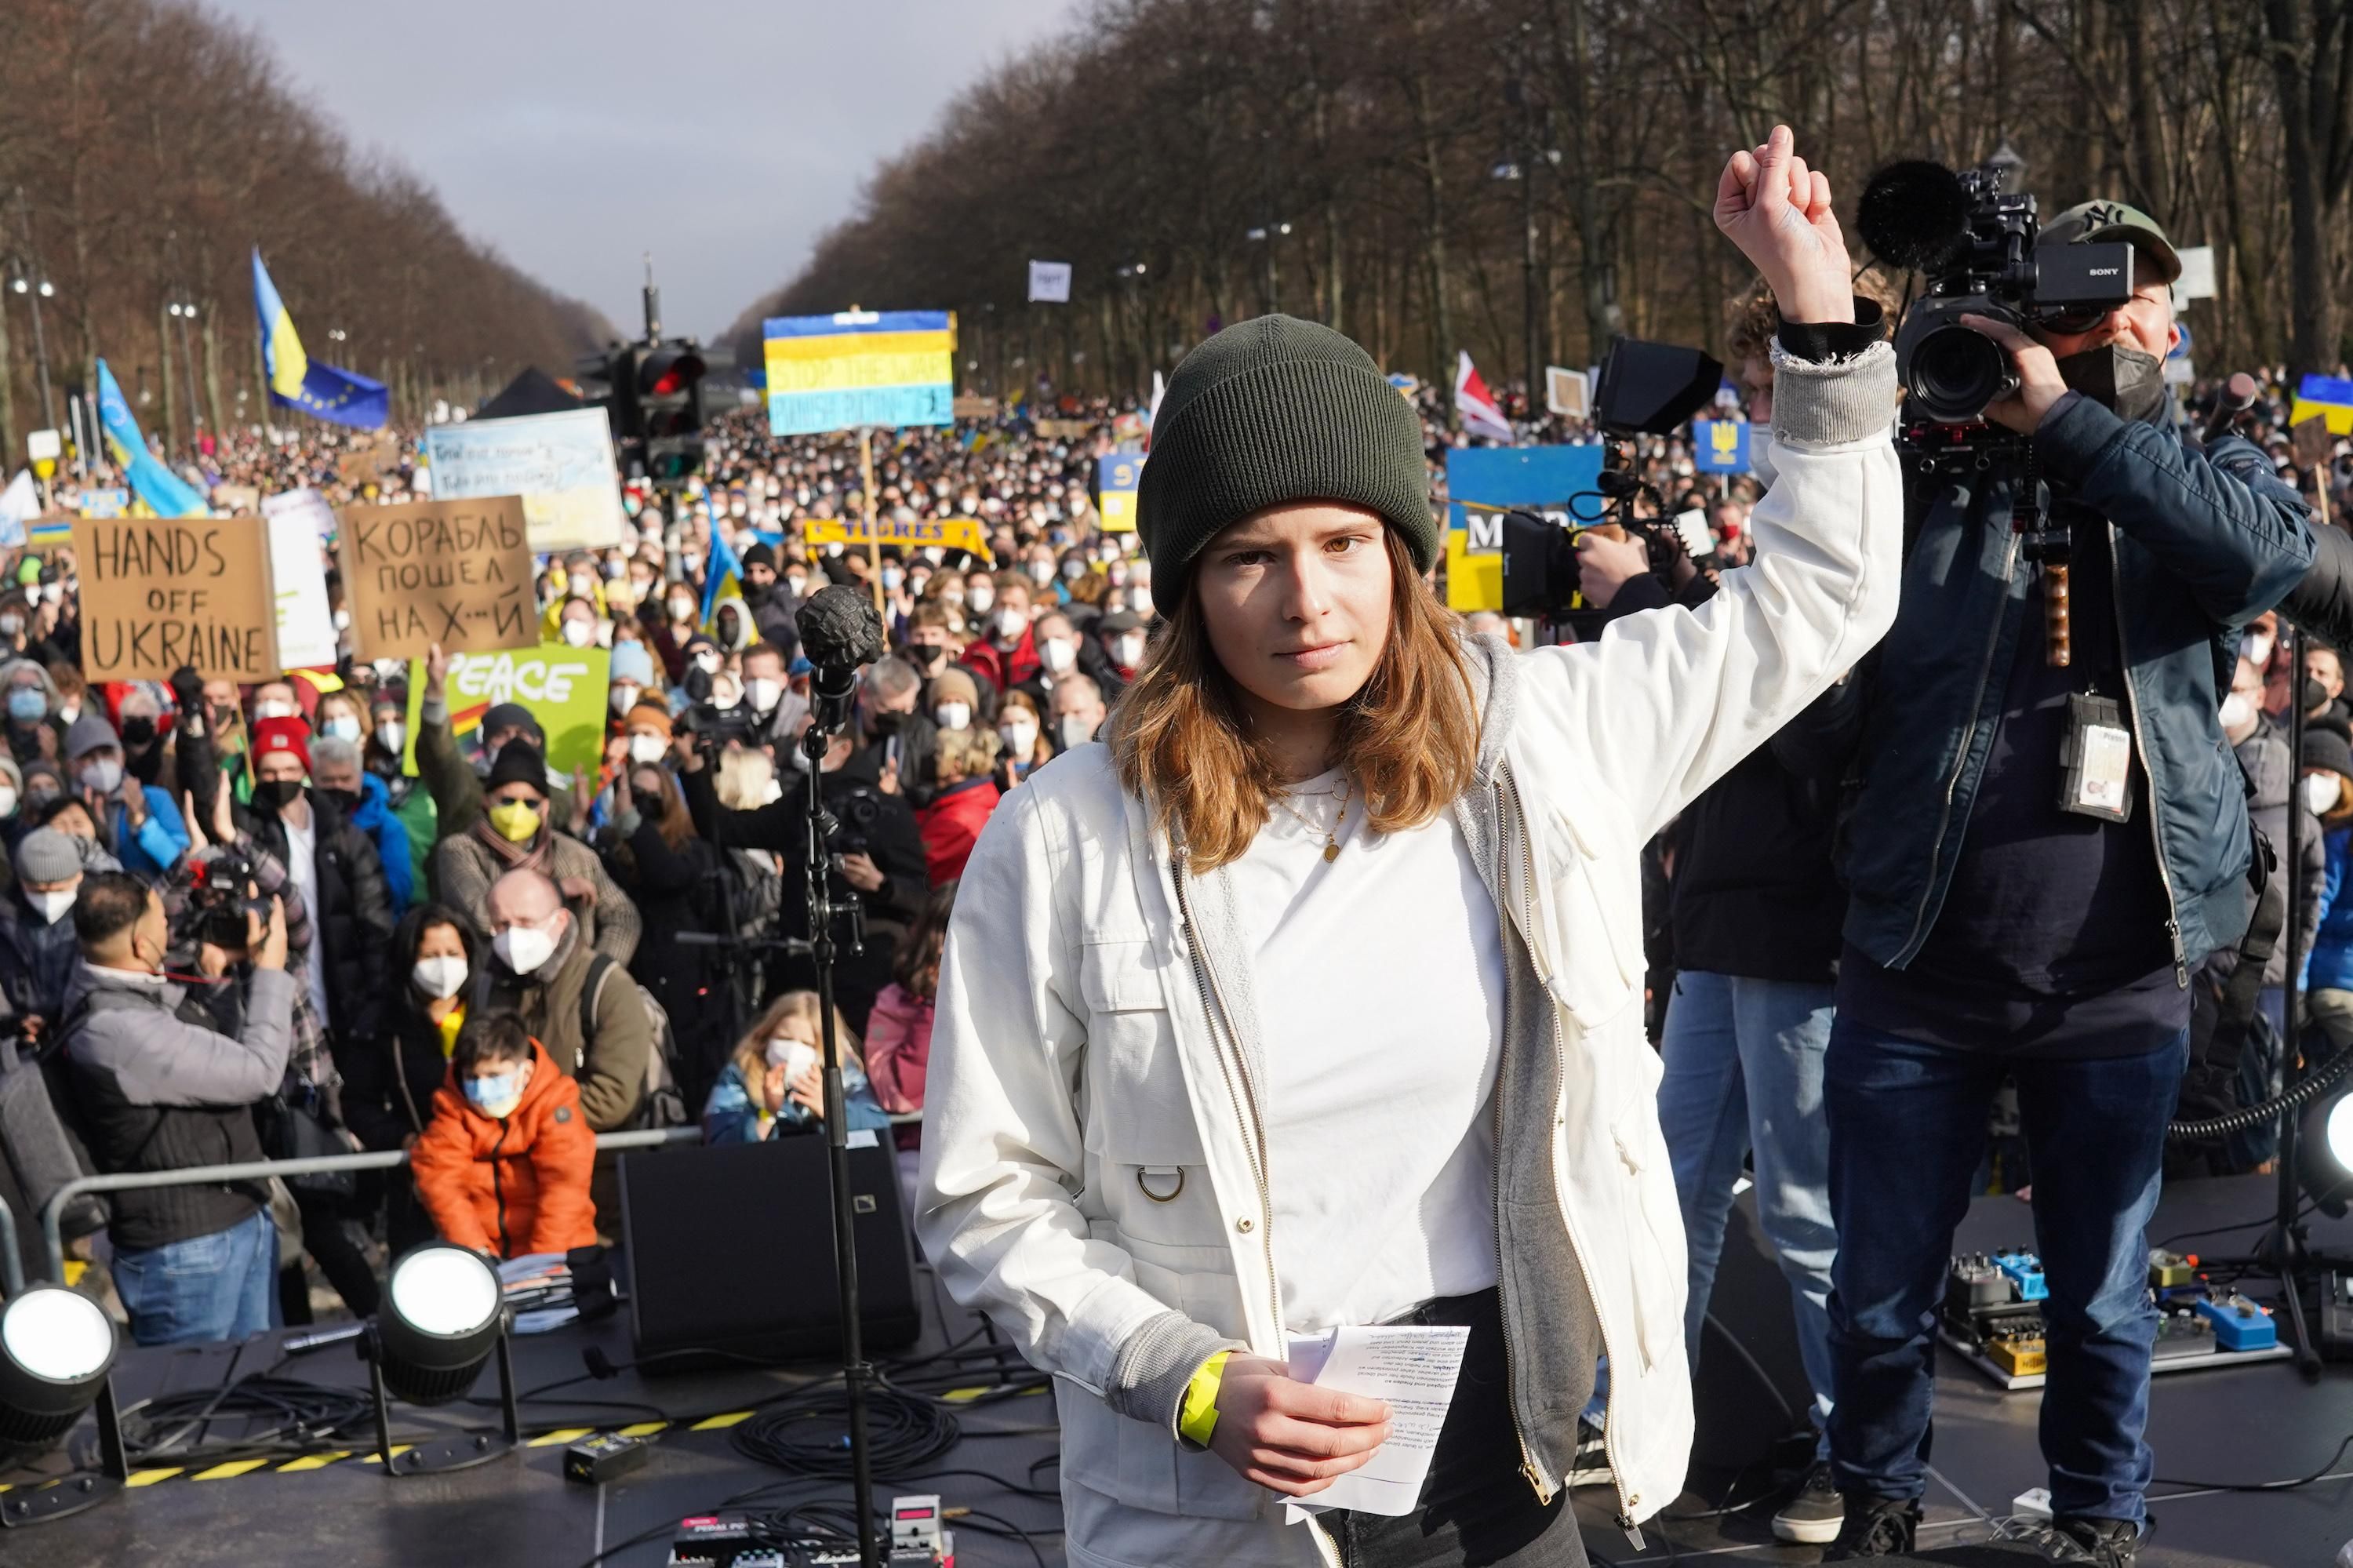 Climate activist Luisa Neubauer turns around after her speech at a demonstration under the slogan "Stop the war! Peace for Ukraine and all of Europe" against the Russian attack on Ukraine on February 27, 2022 in Berlin.